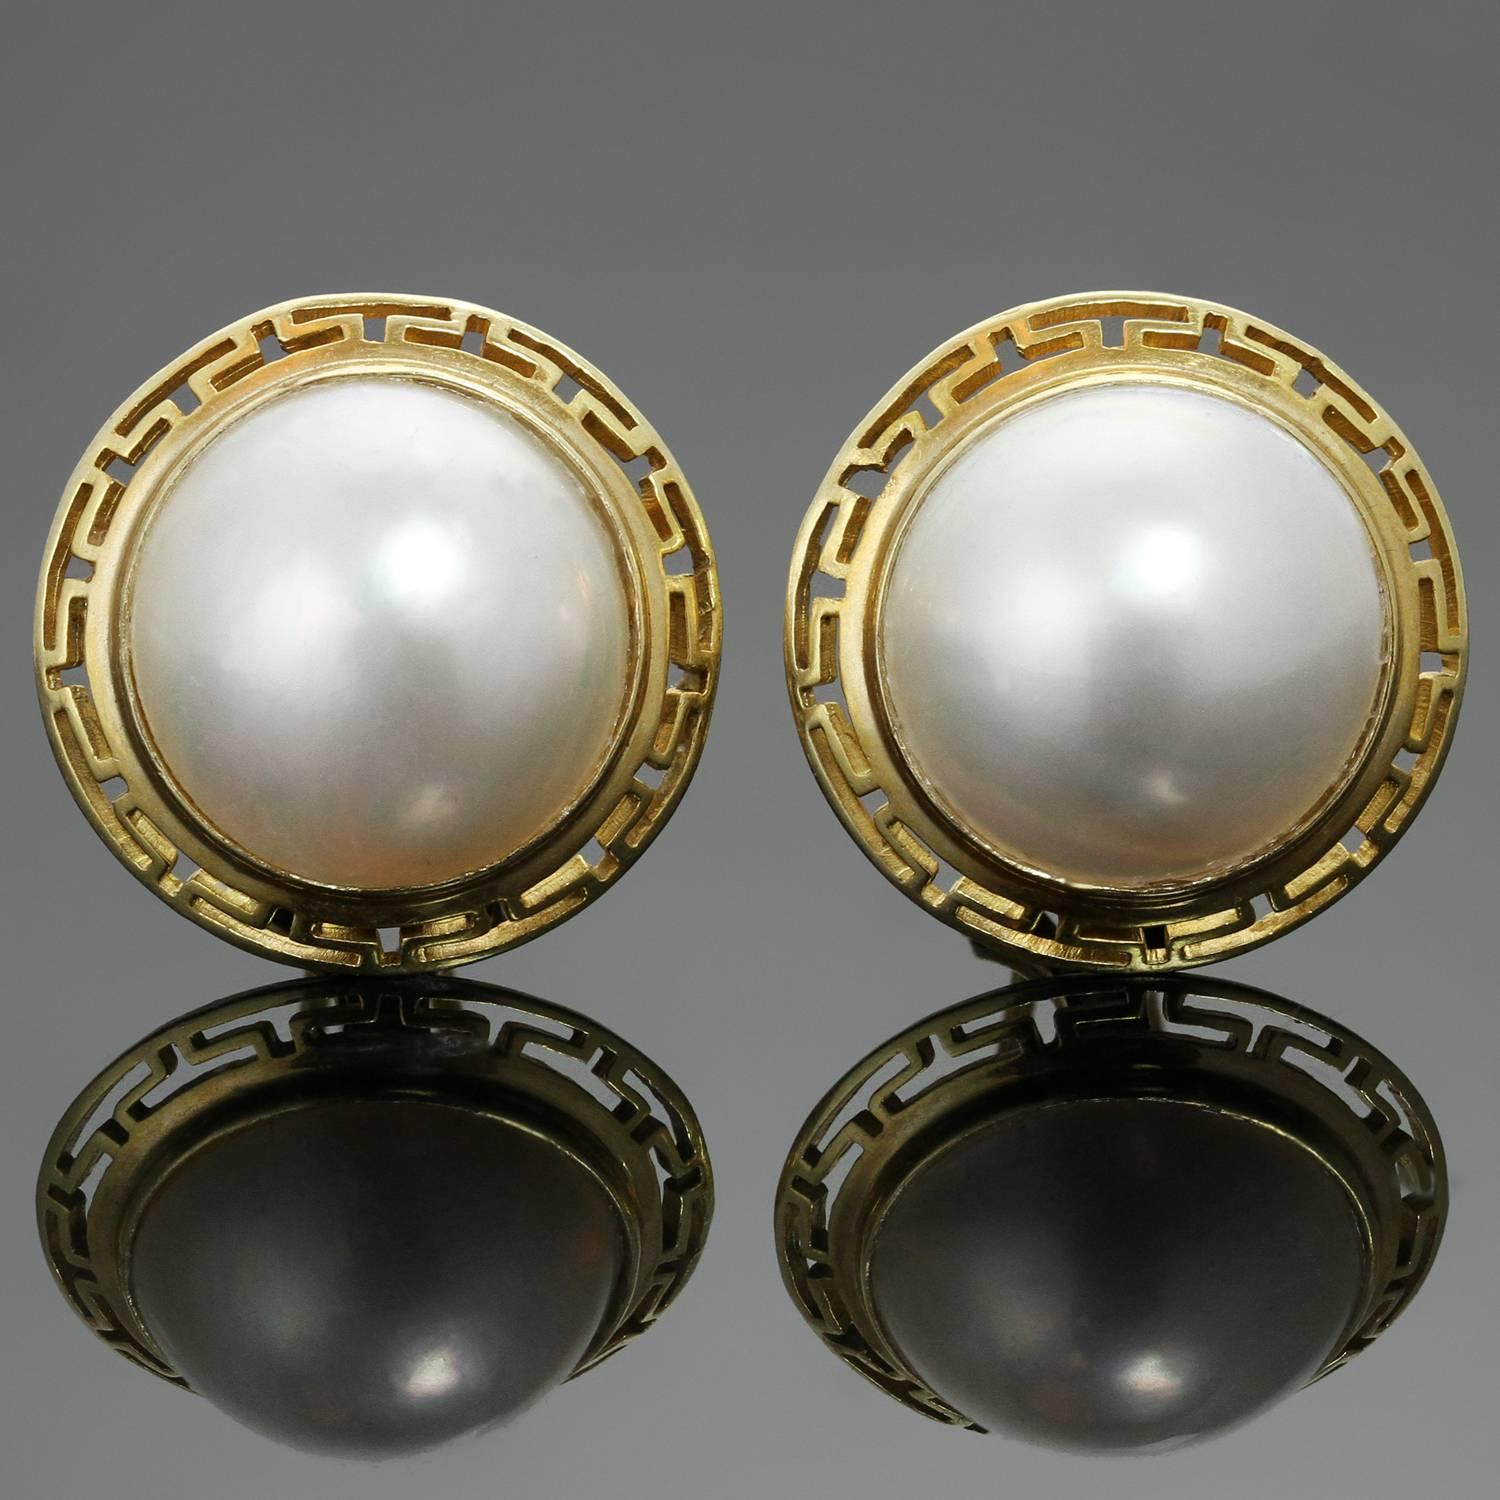 These timeless 18k yellow gold round lever-back earrings are set with 14.0mm mother-of-pearls and feature a greek key pattern border. Made in United States circa 1990s. Measurements: 0.78